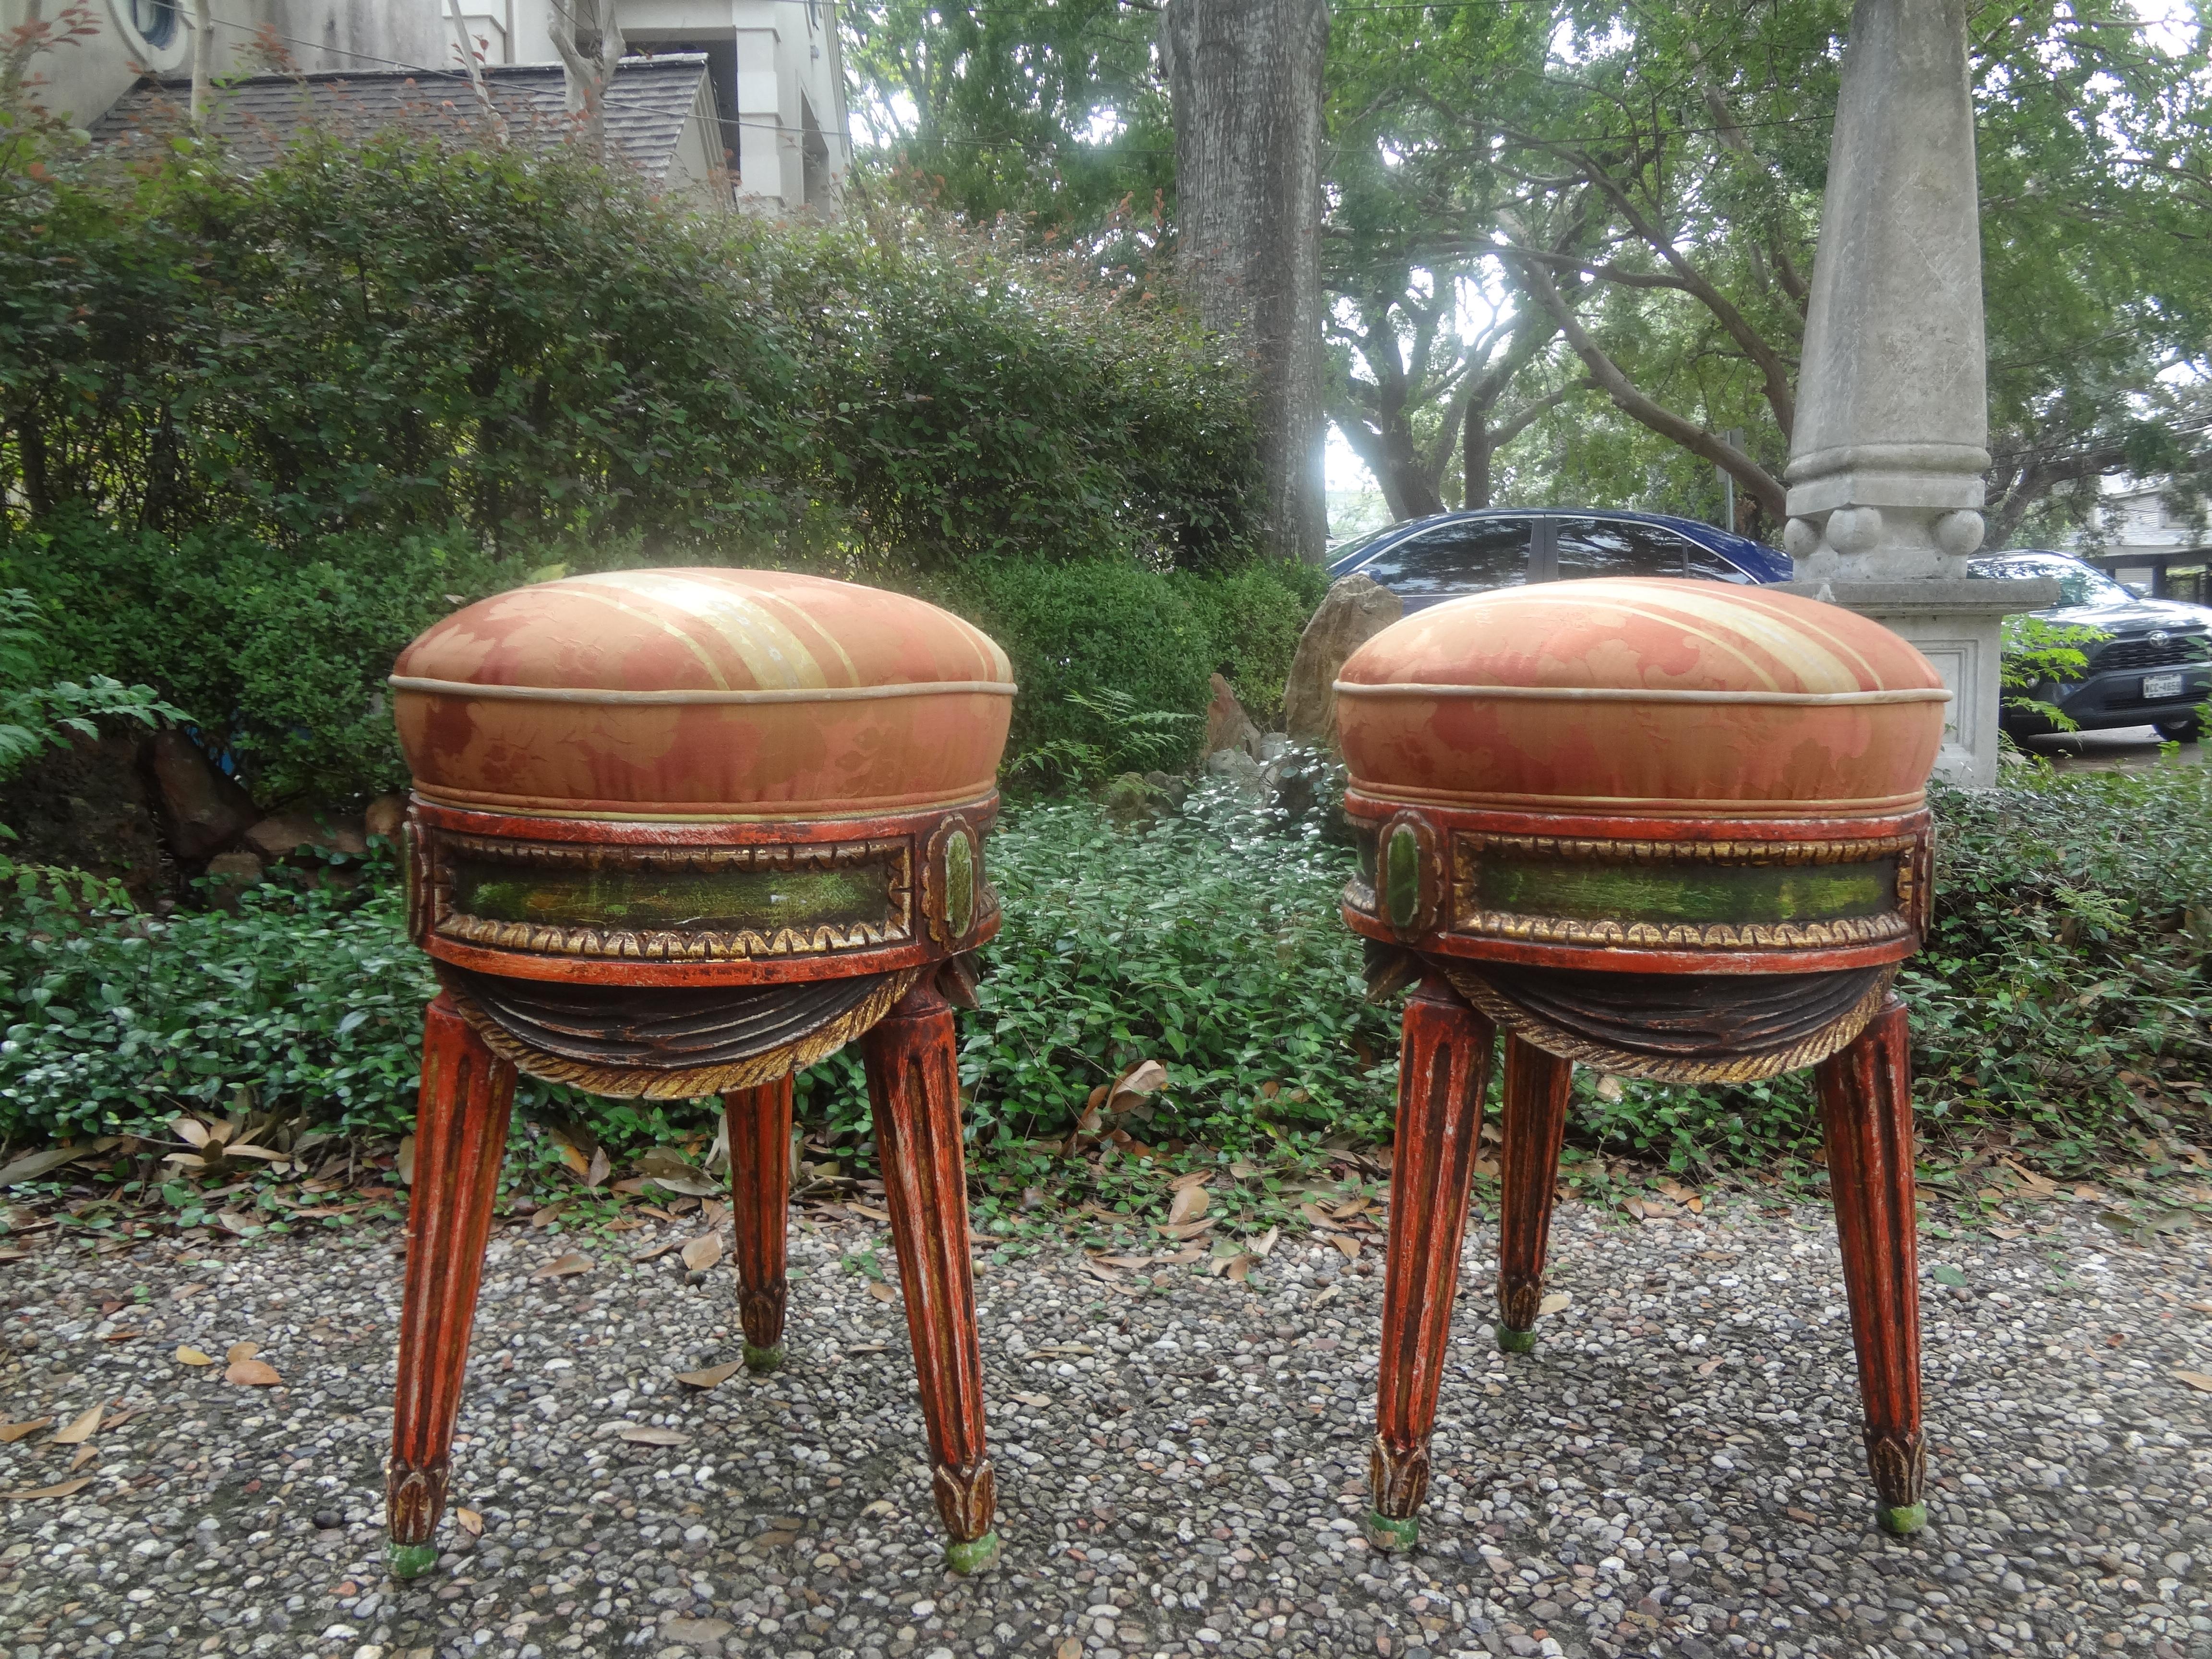 Pair Of Italian Painted Draped Poufs.
Our pair of Italian draped poufs or ottomans are paint decorated lovely shades of Tuscan colors as they hail from the Florence area of Italy. These poufs, ottomans or stools would look great under a console